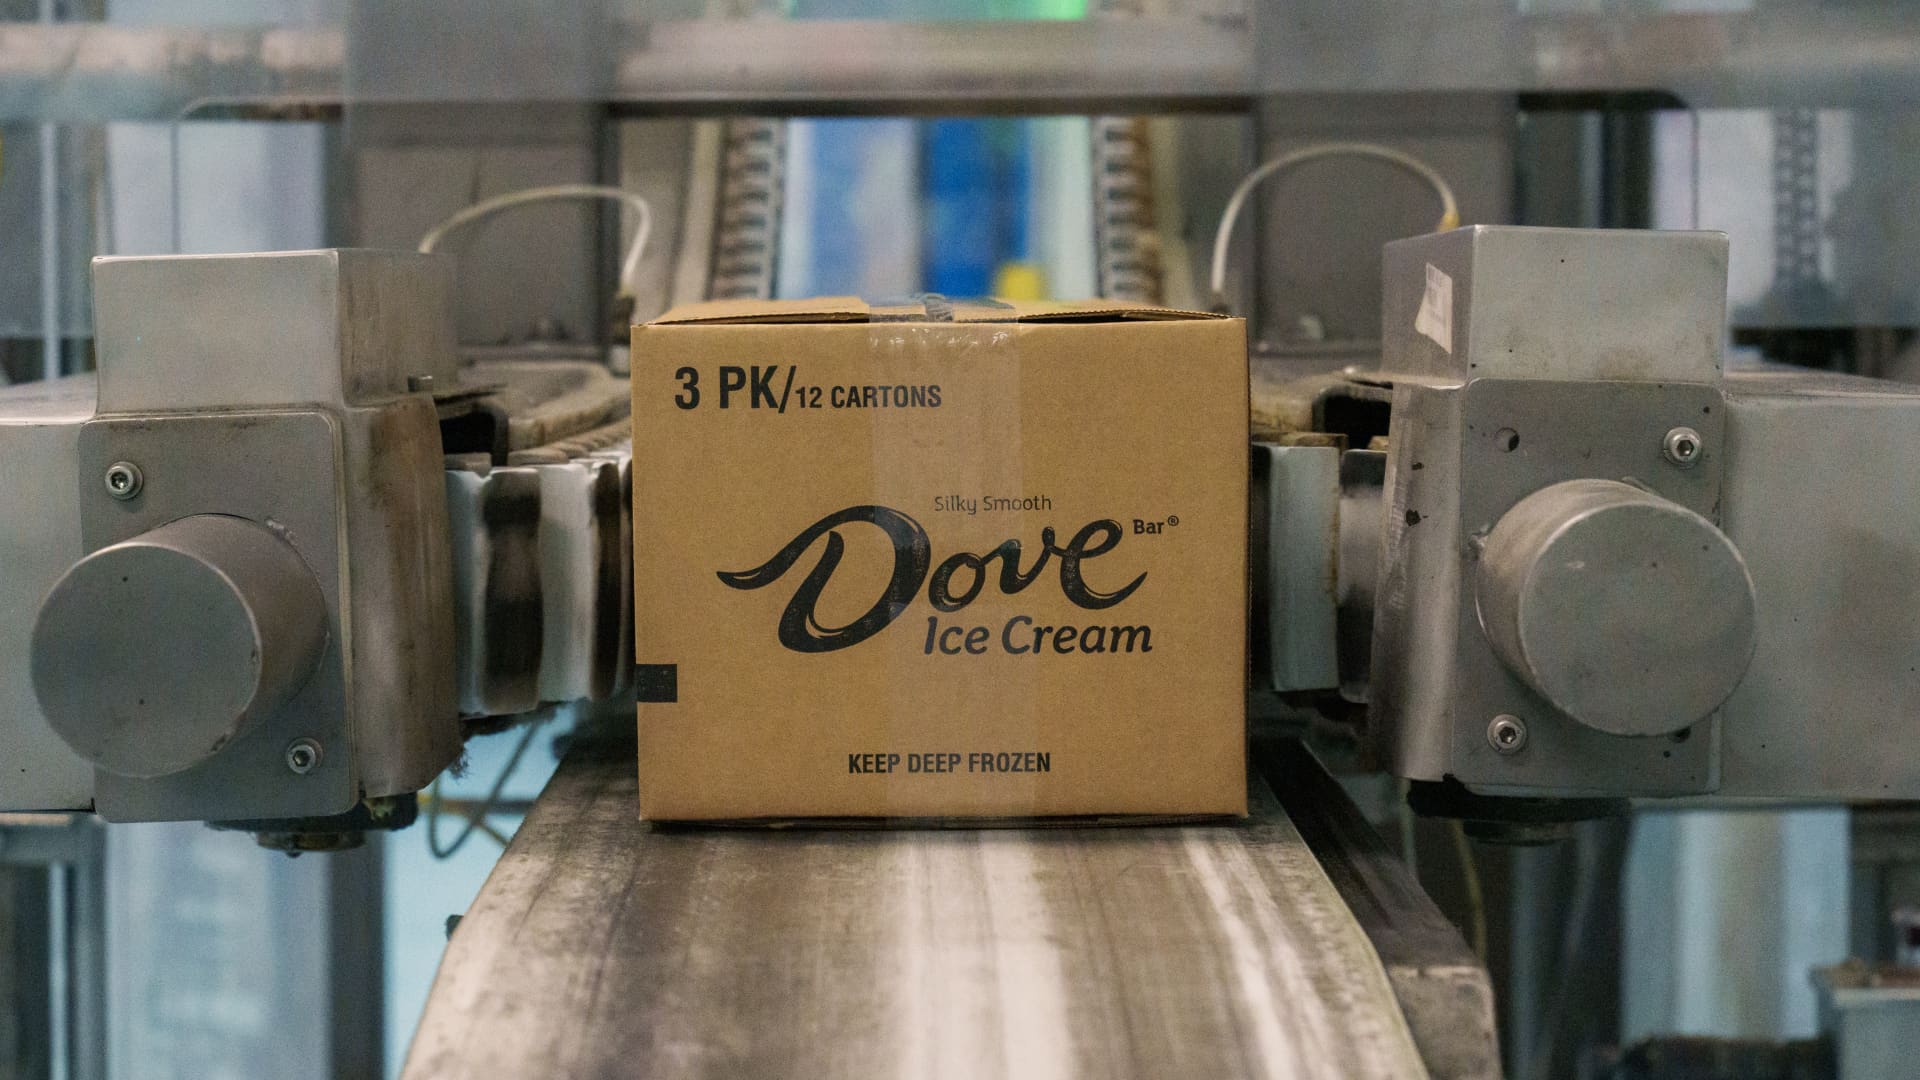 Mars candy looks to grow ice cream business with factory investment